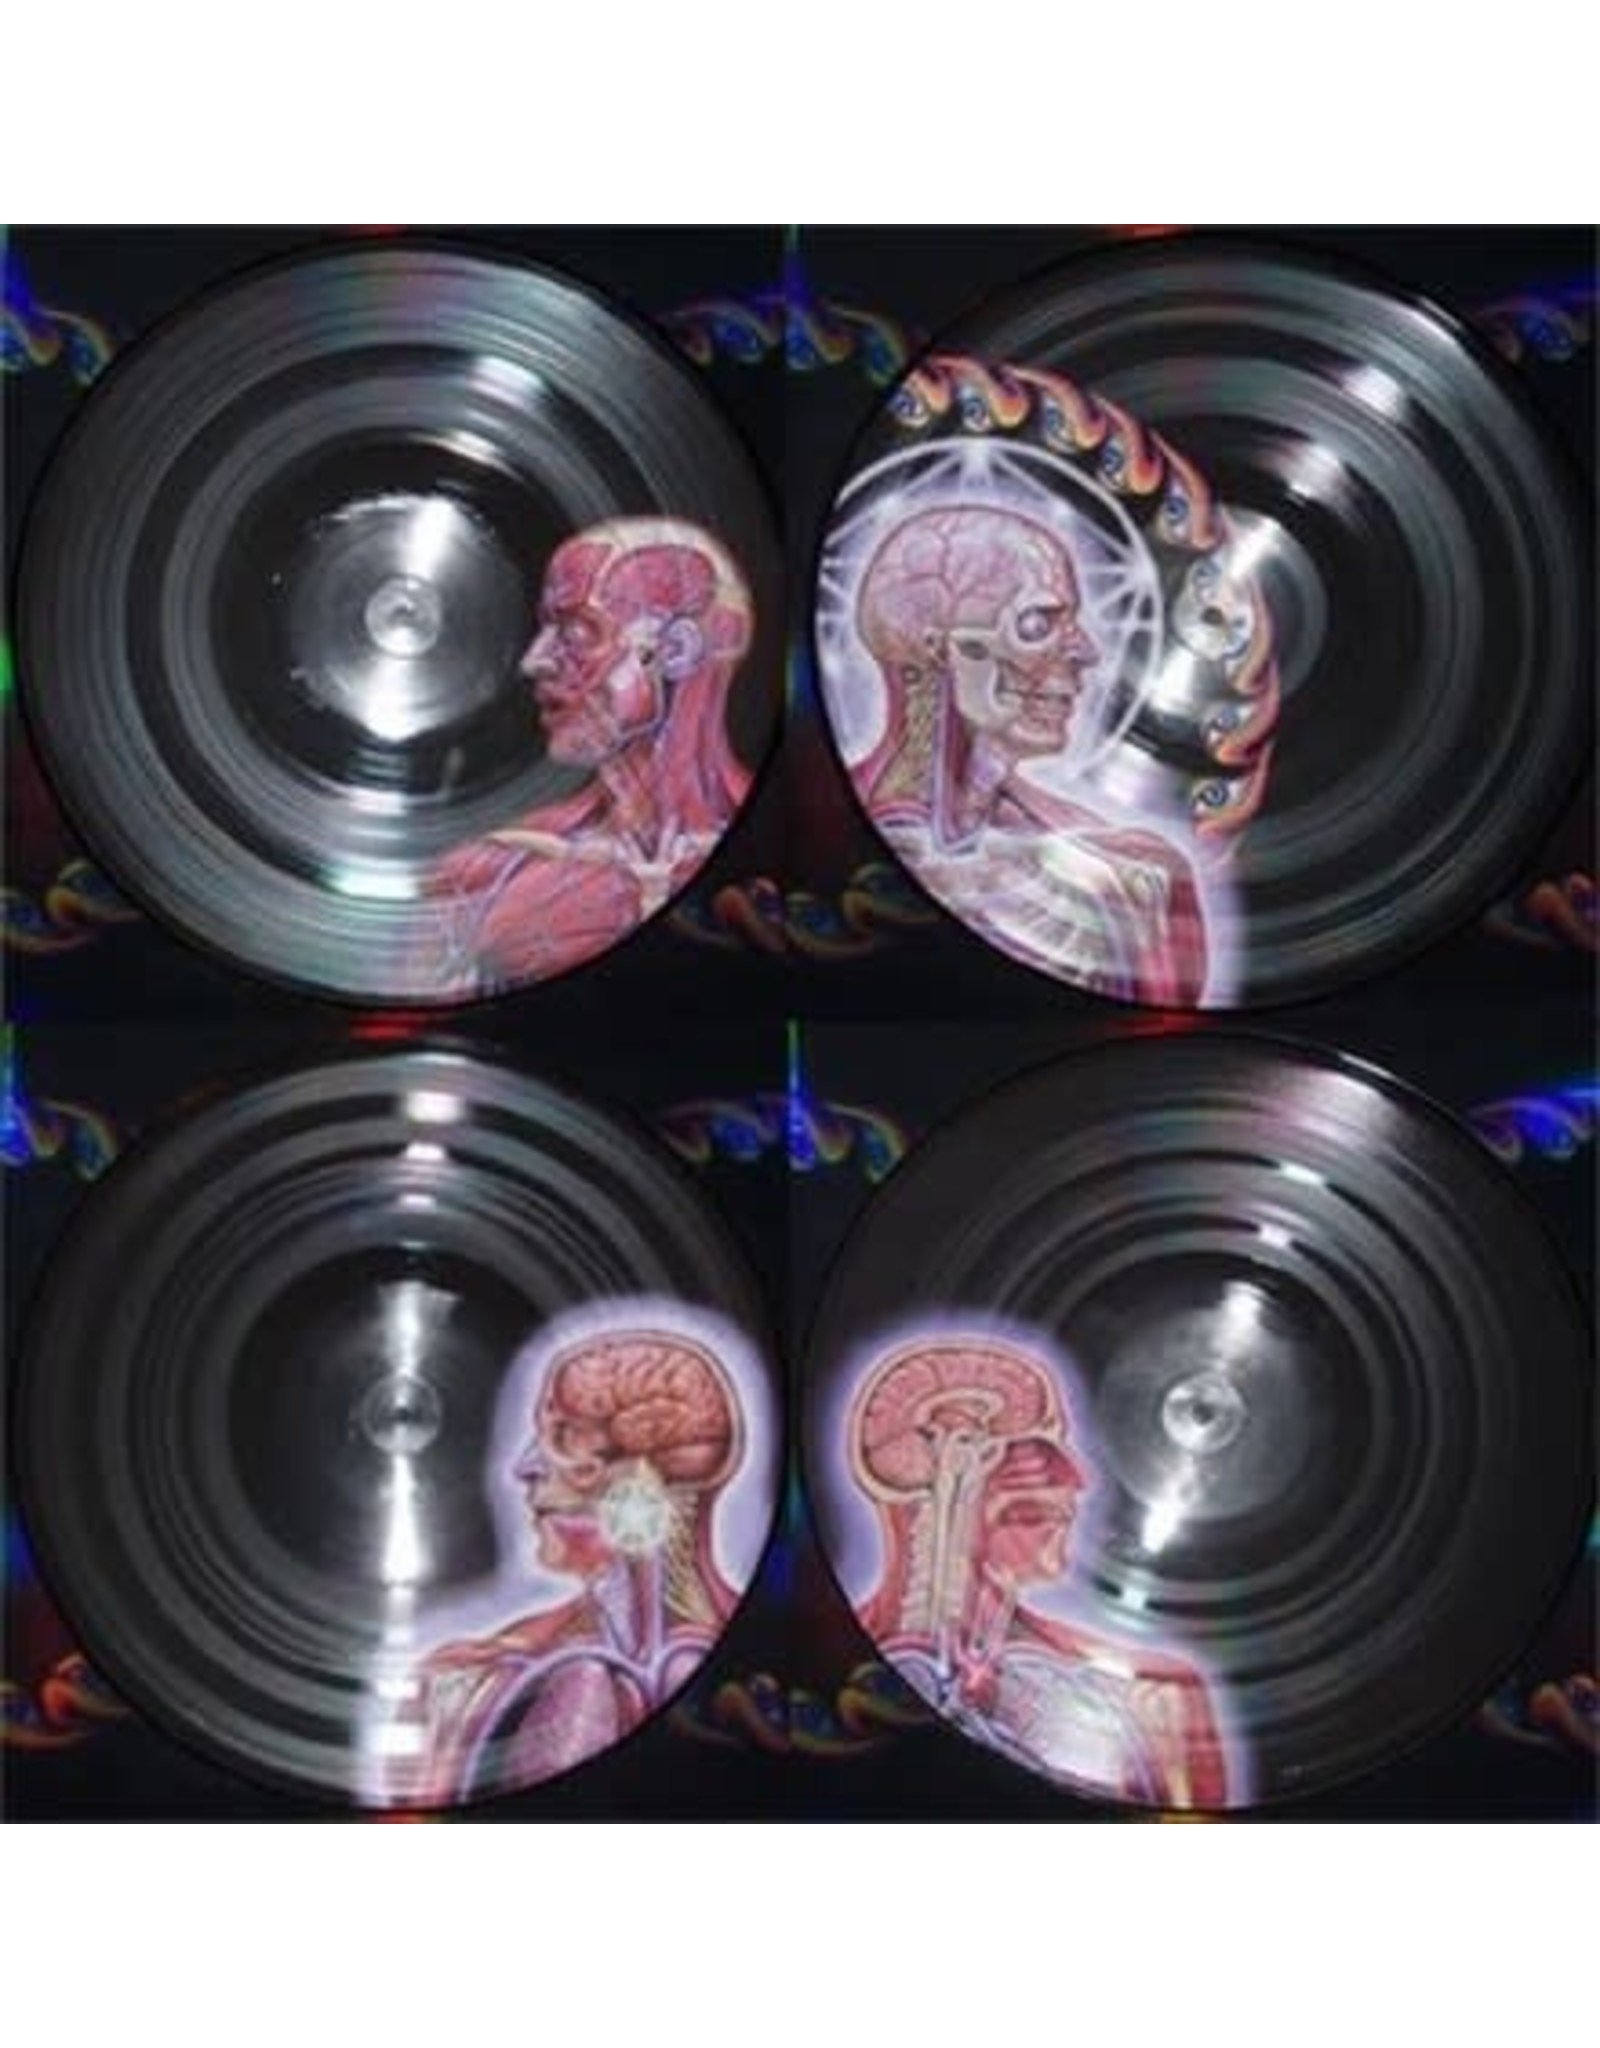 Sony Tool: Lateralus LP